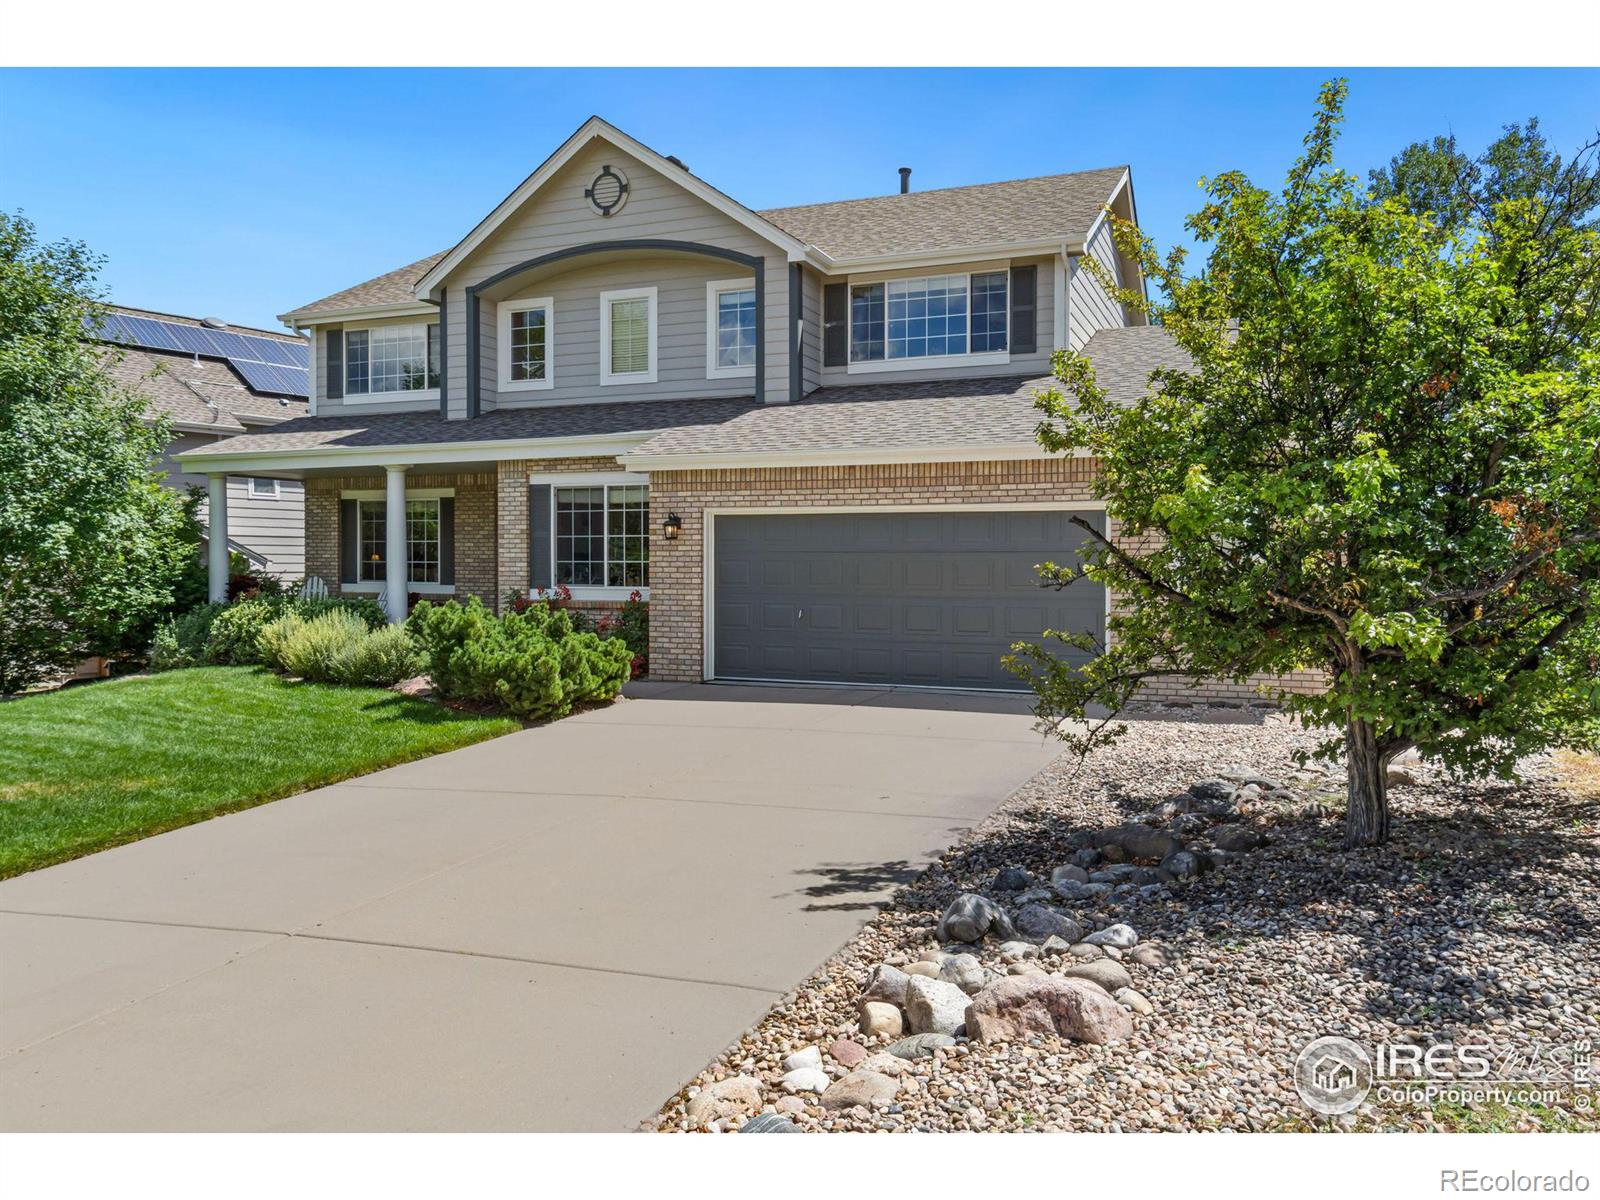 5808  Fossil Creek Parkway, fort collins MLS: 456789993579 Beds: 5 Baths: 4 Price: $750,000